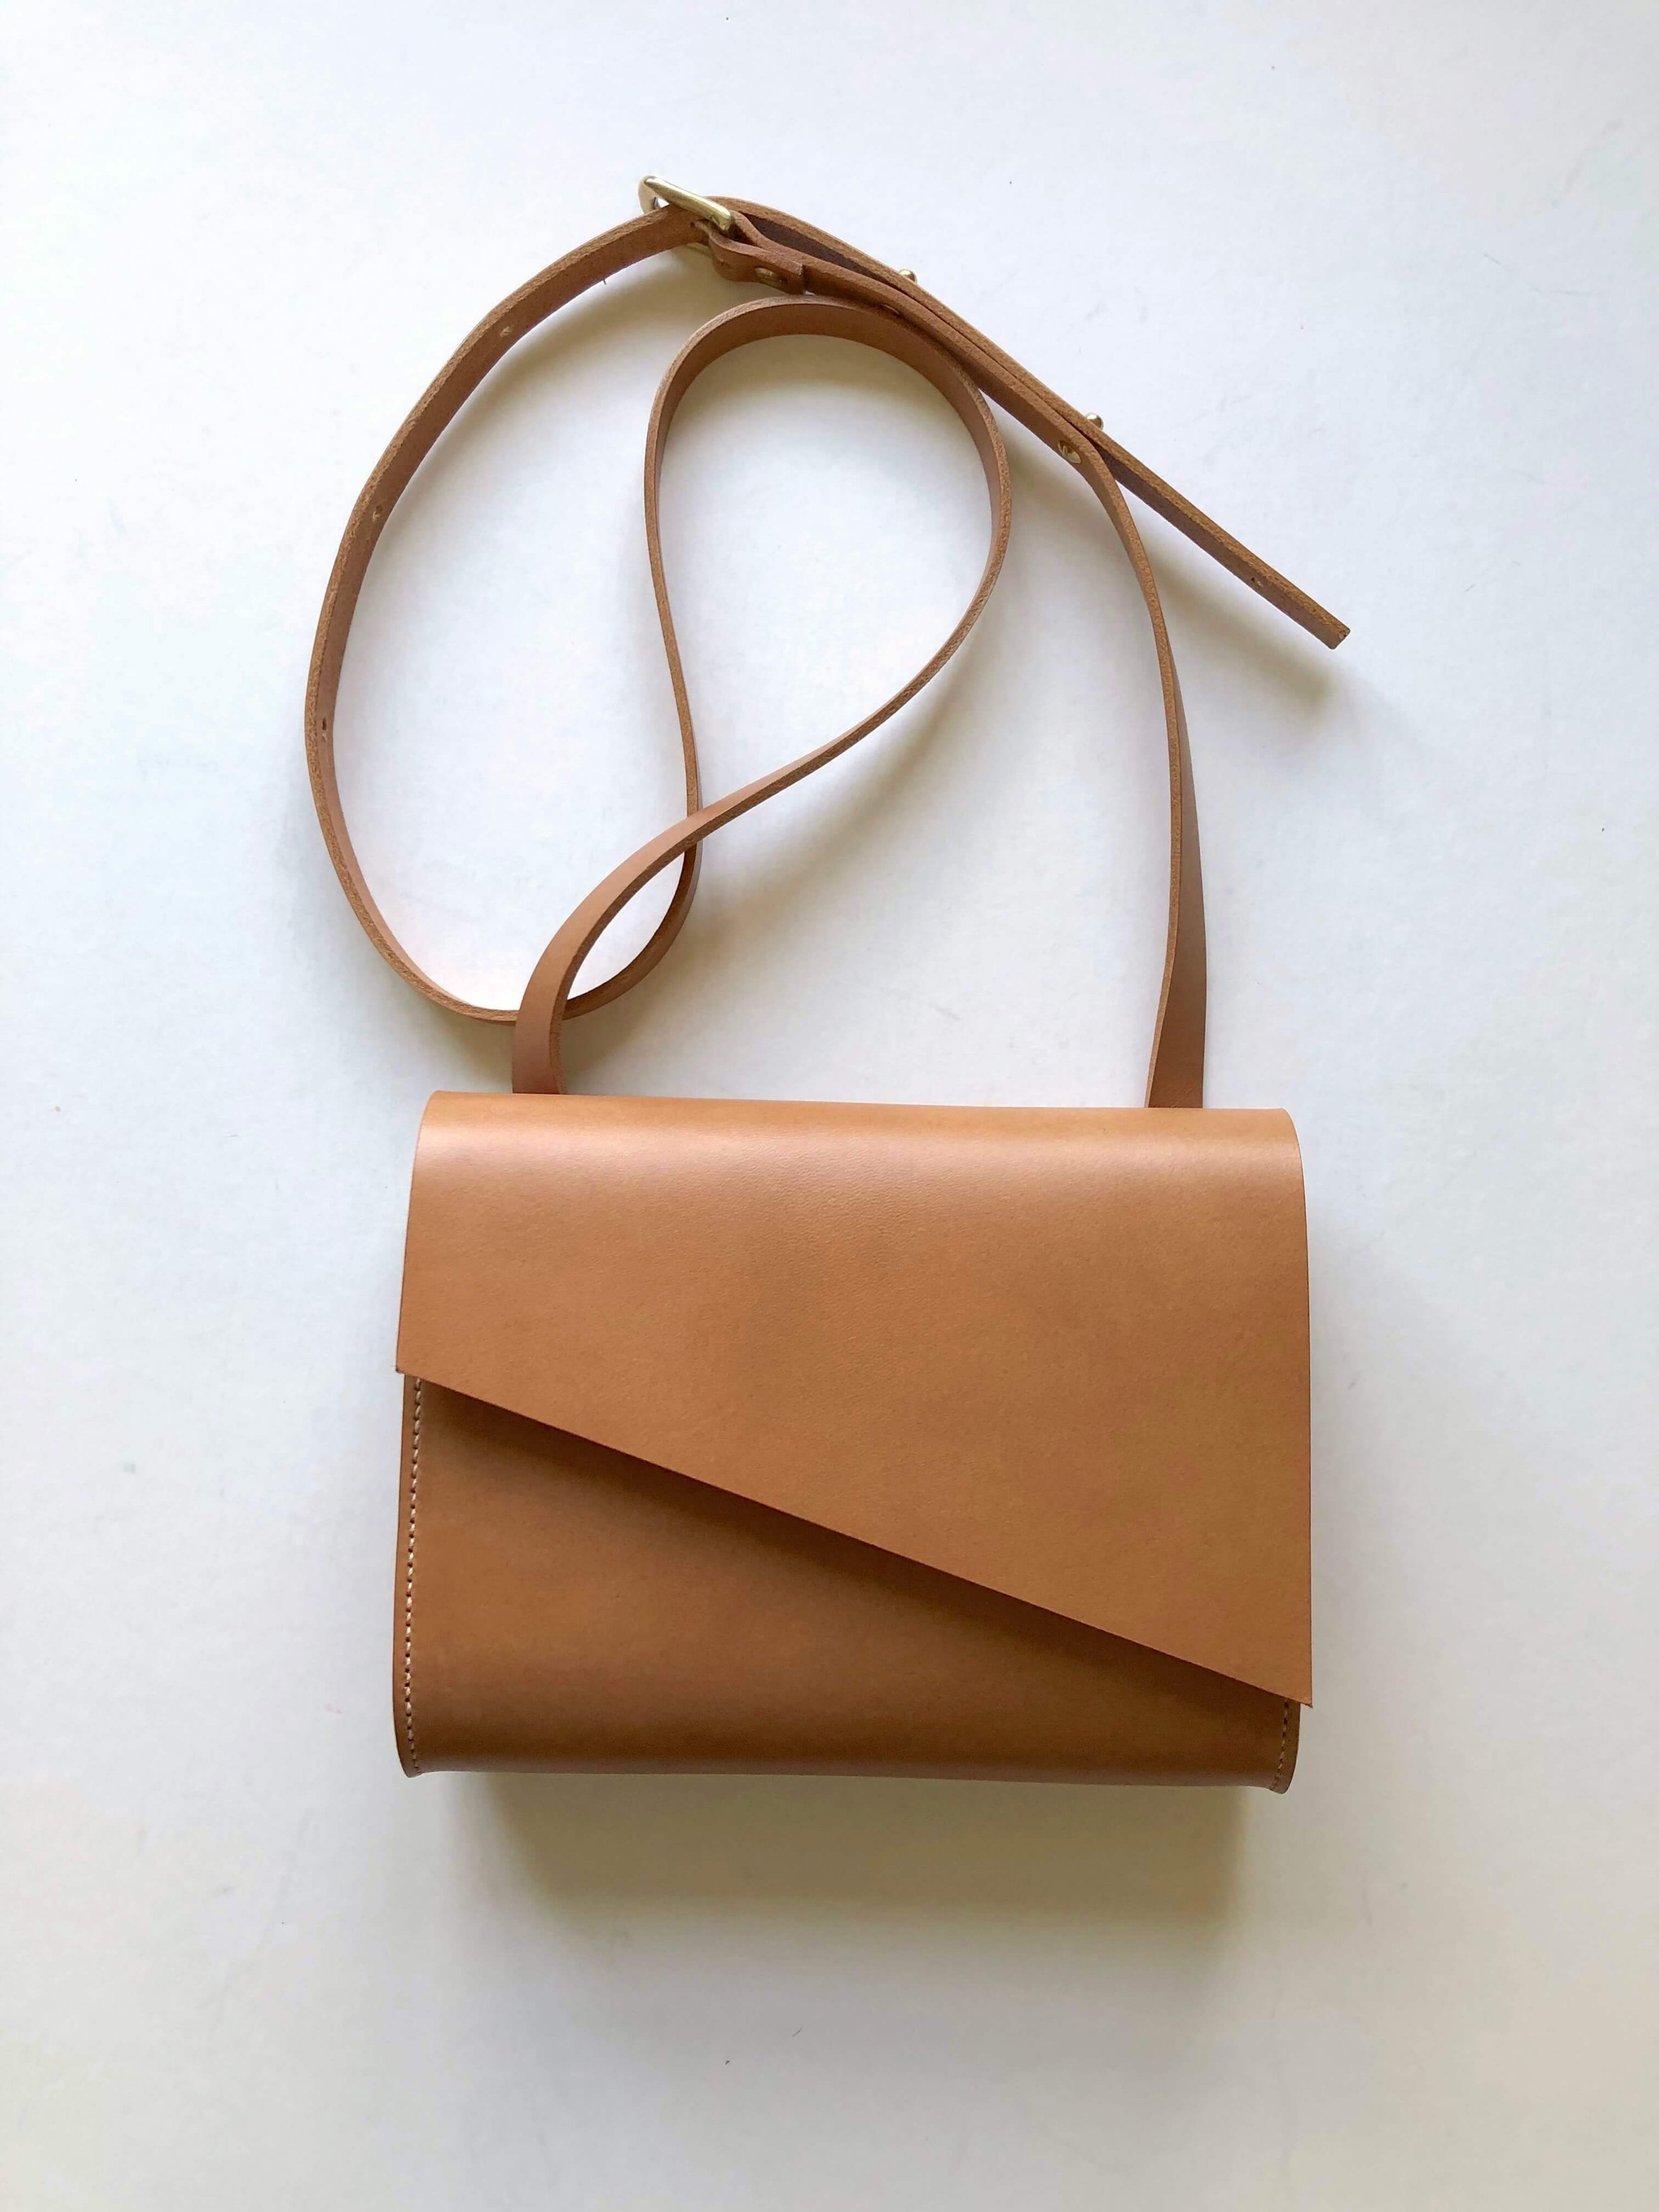 CARV sustainable leather bag handmade in the UK.